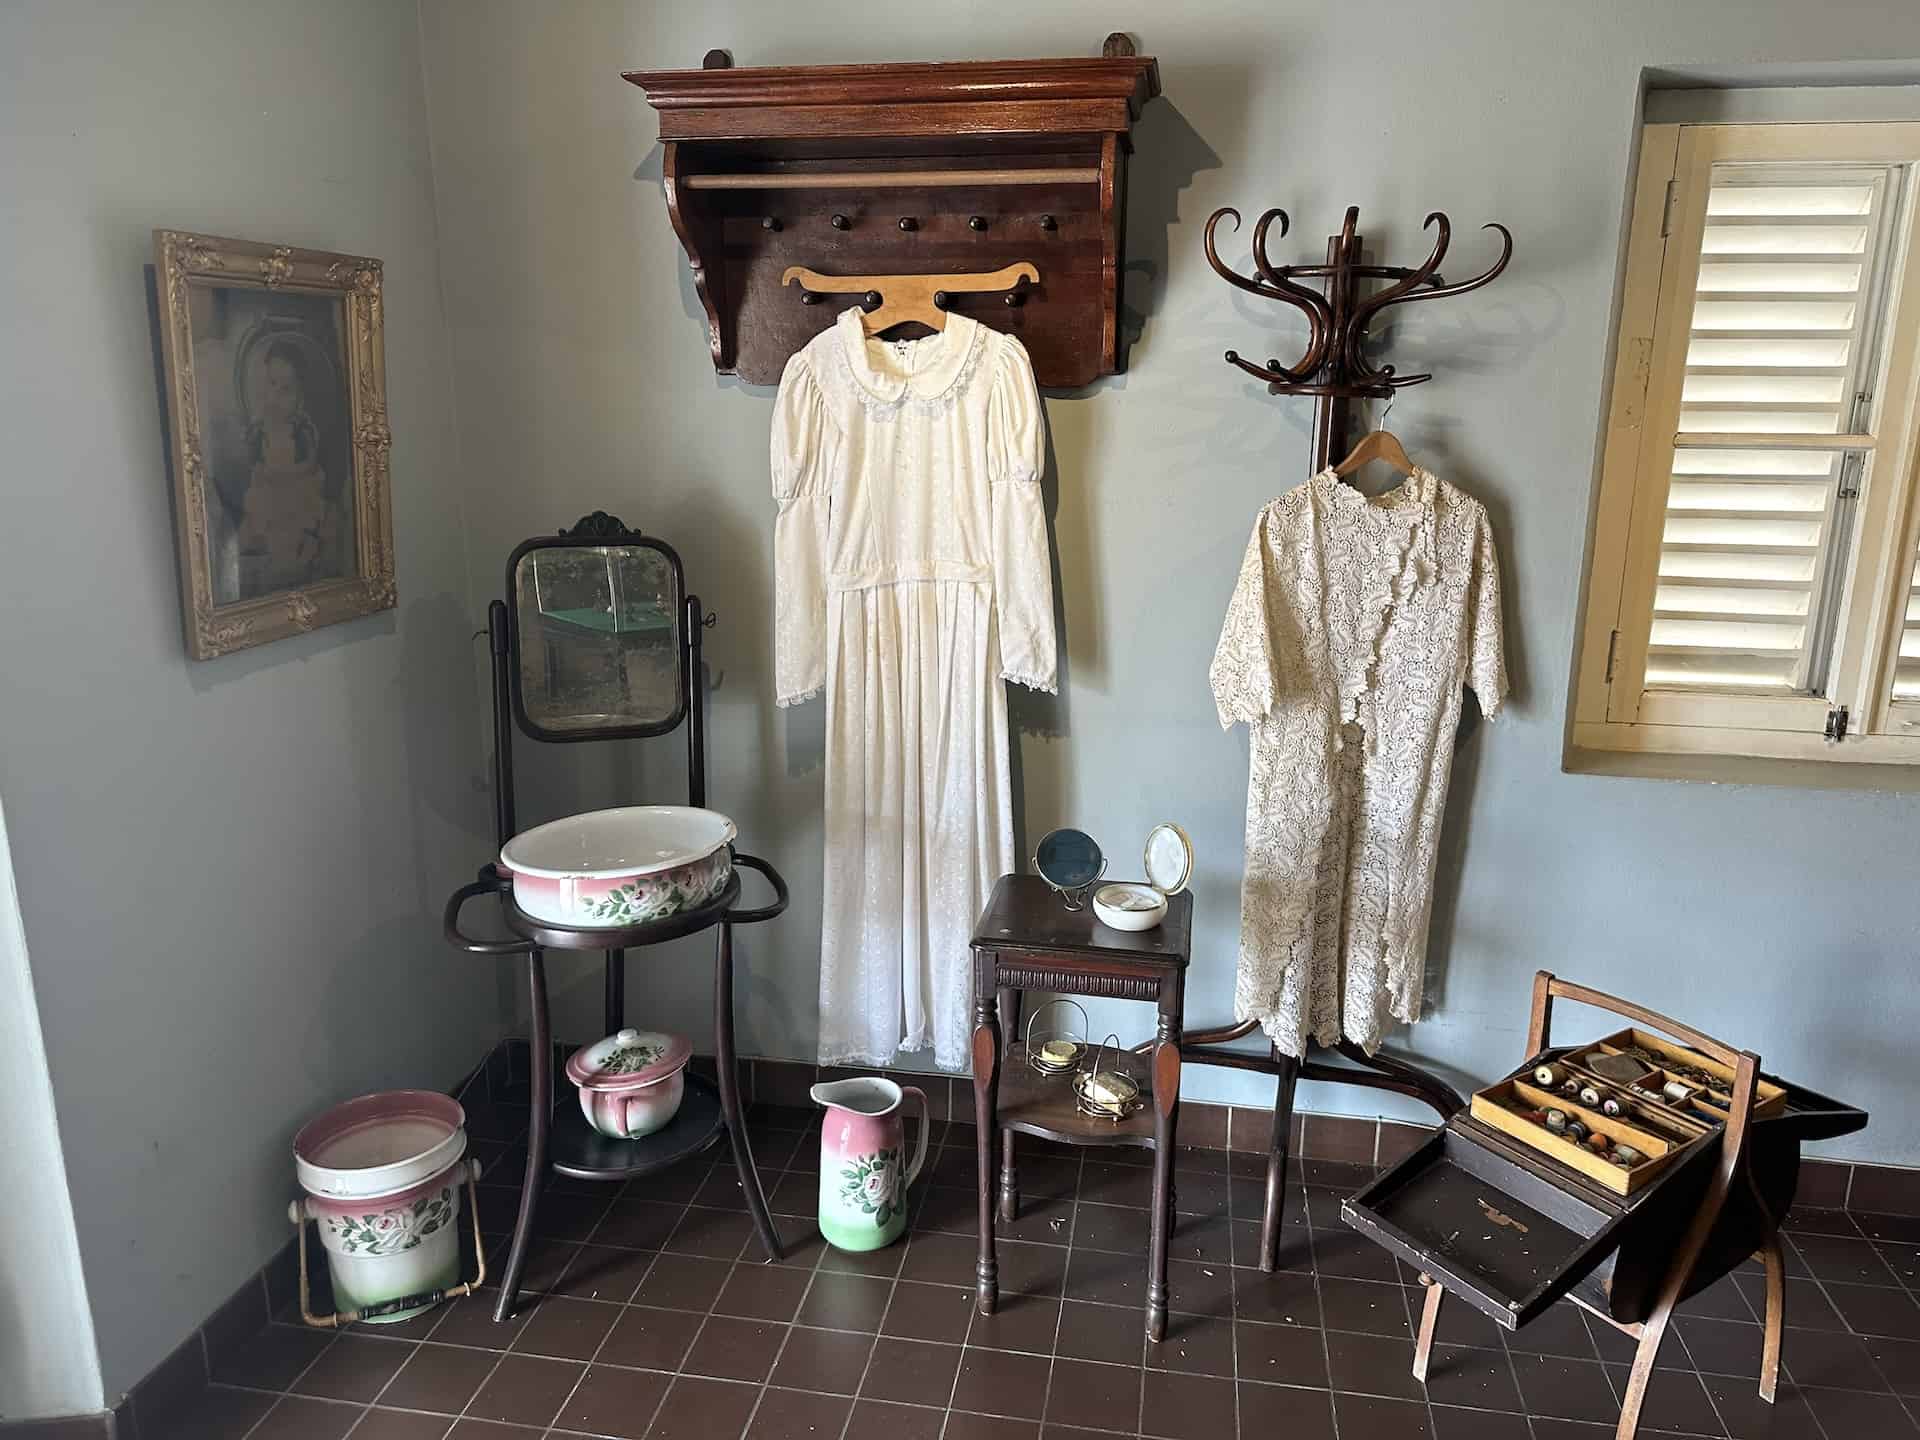 Clothing and household items at the Historical Museum of Aruba